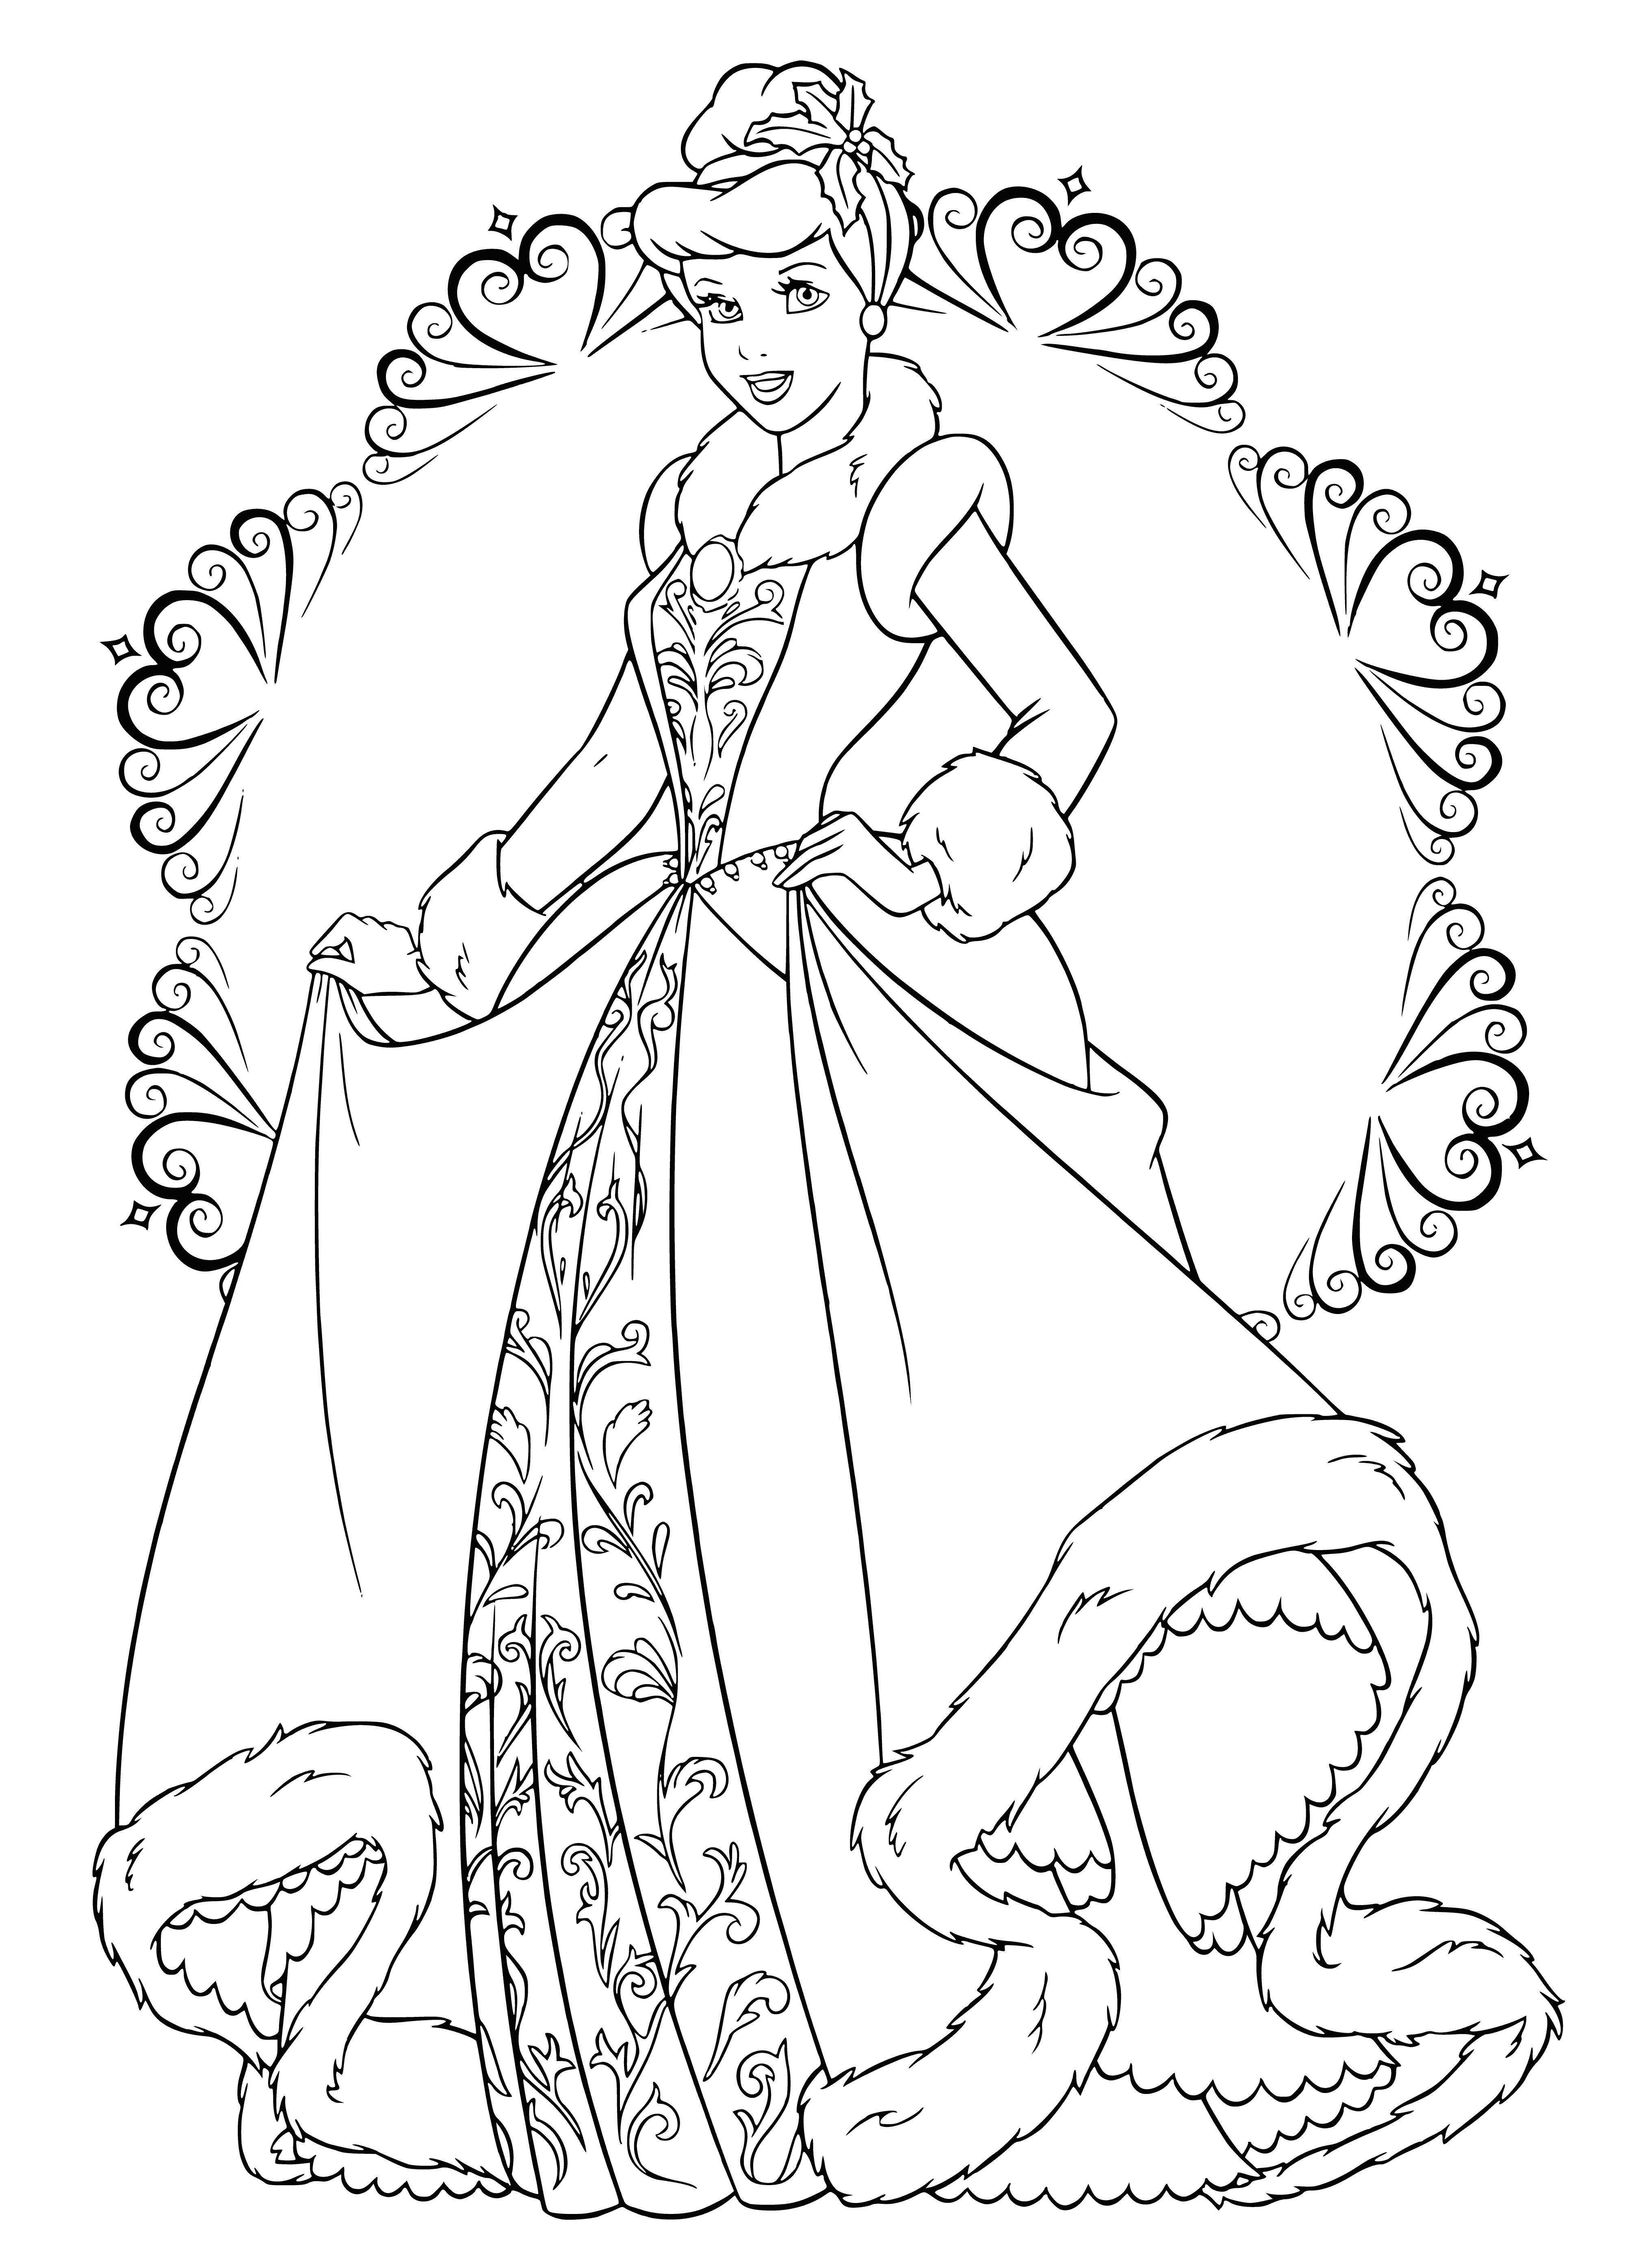 Cinderella's winter outfit coloring page